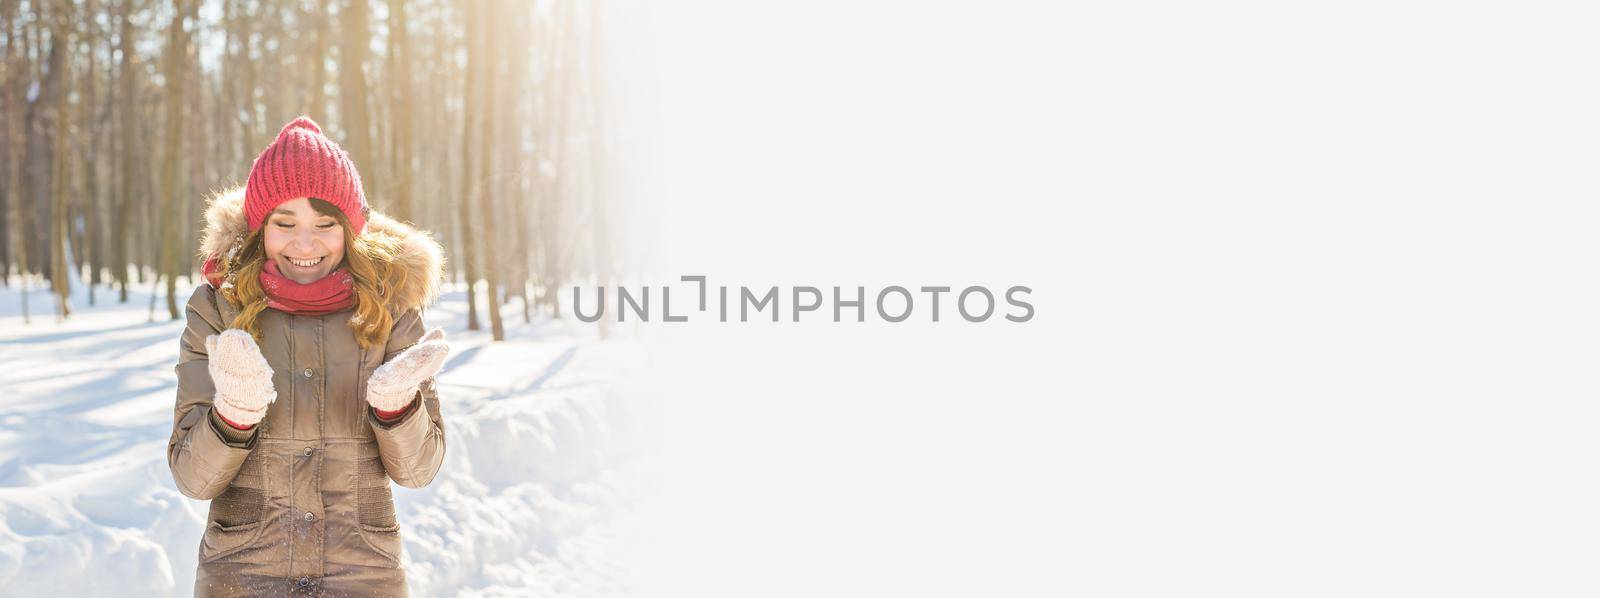 Banner Beauty Girl Blowing Snow in frosty winter Park copy space. Outdoors. Flying Snowflakes. by Satura86